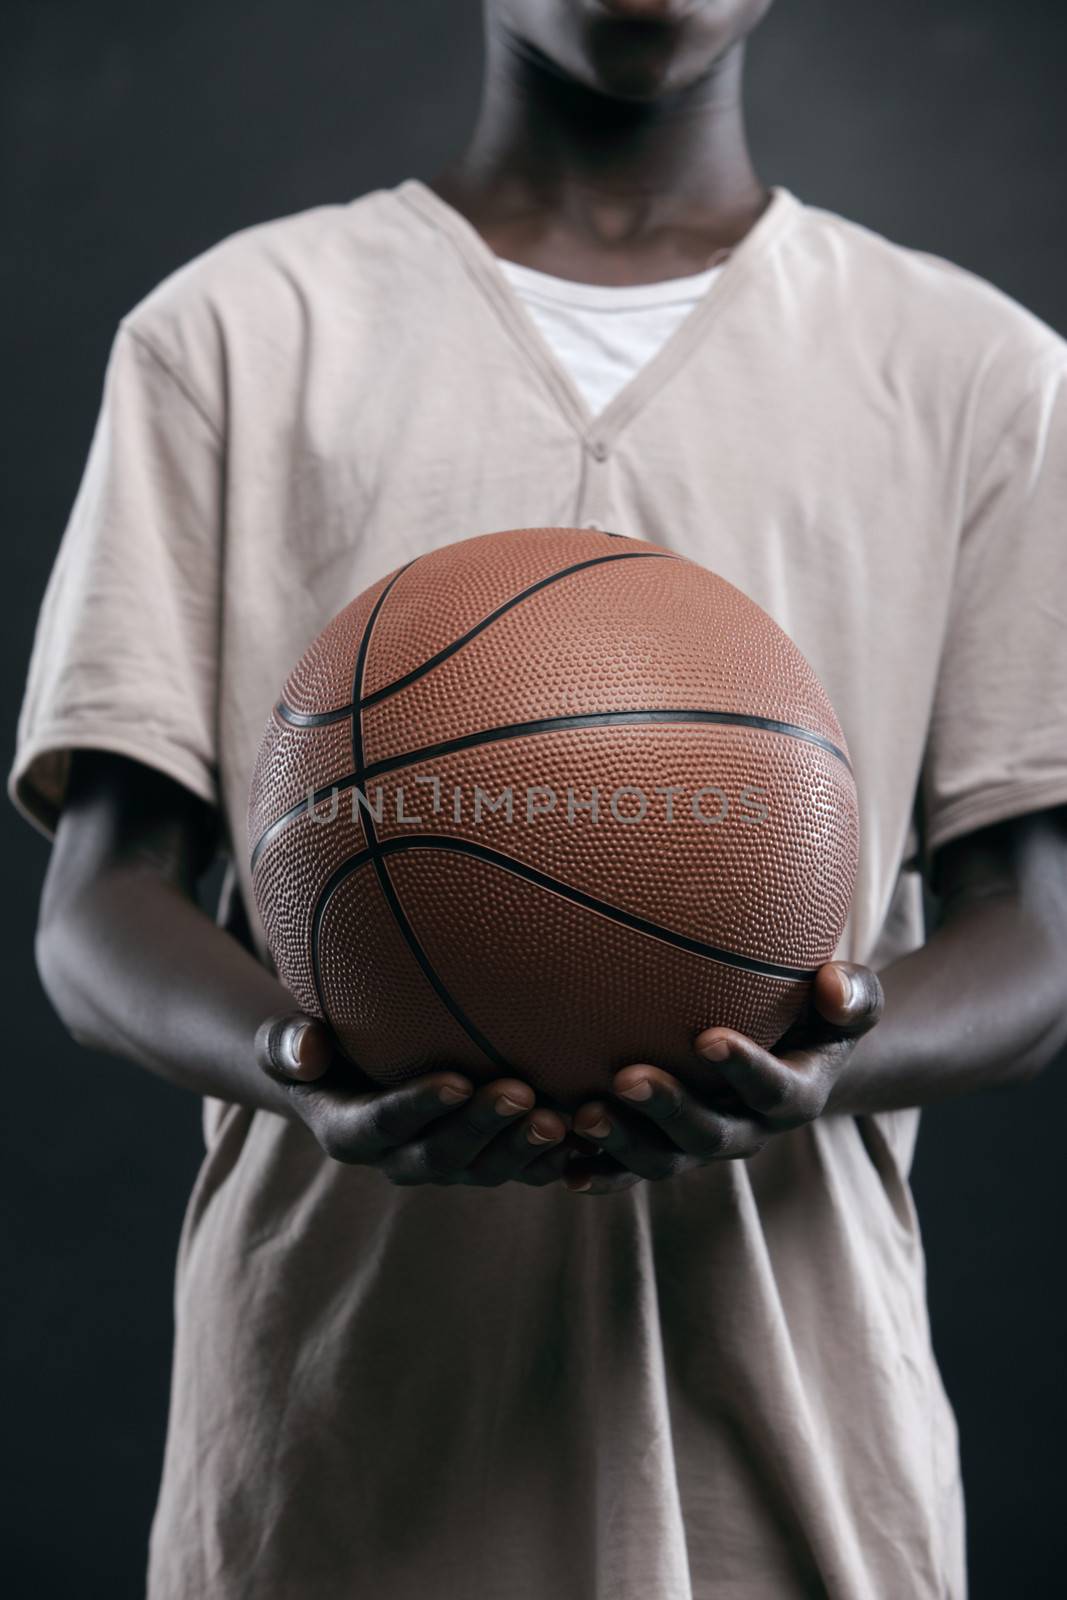 Cropped image of African boy holding a basket ball